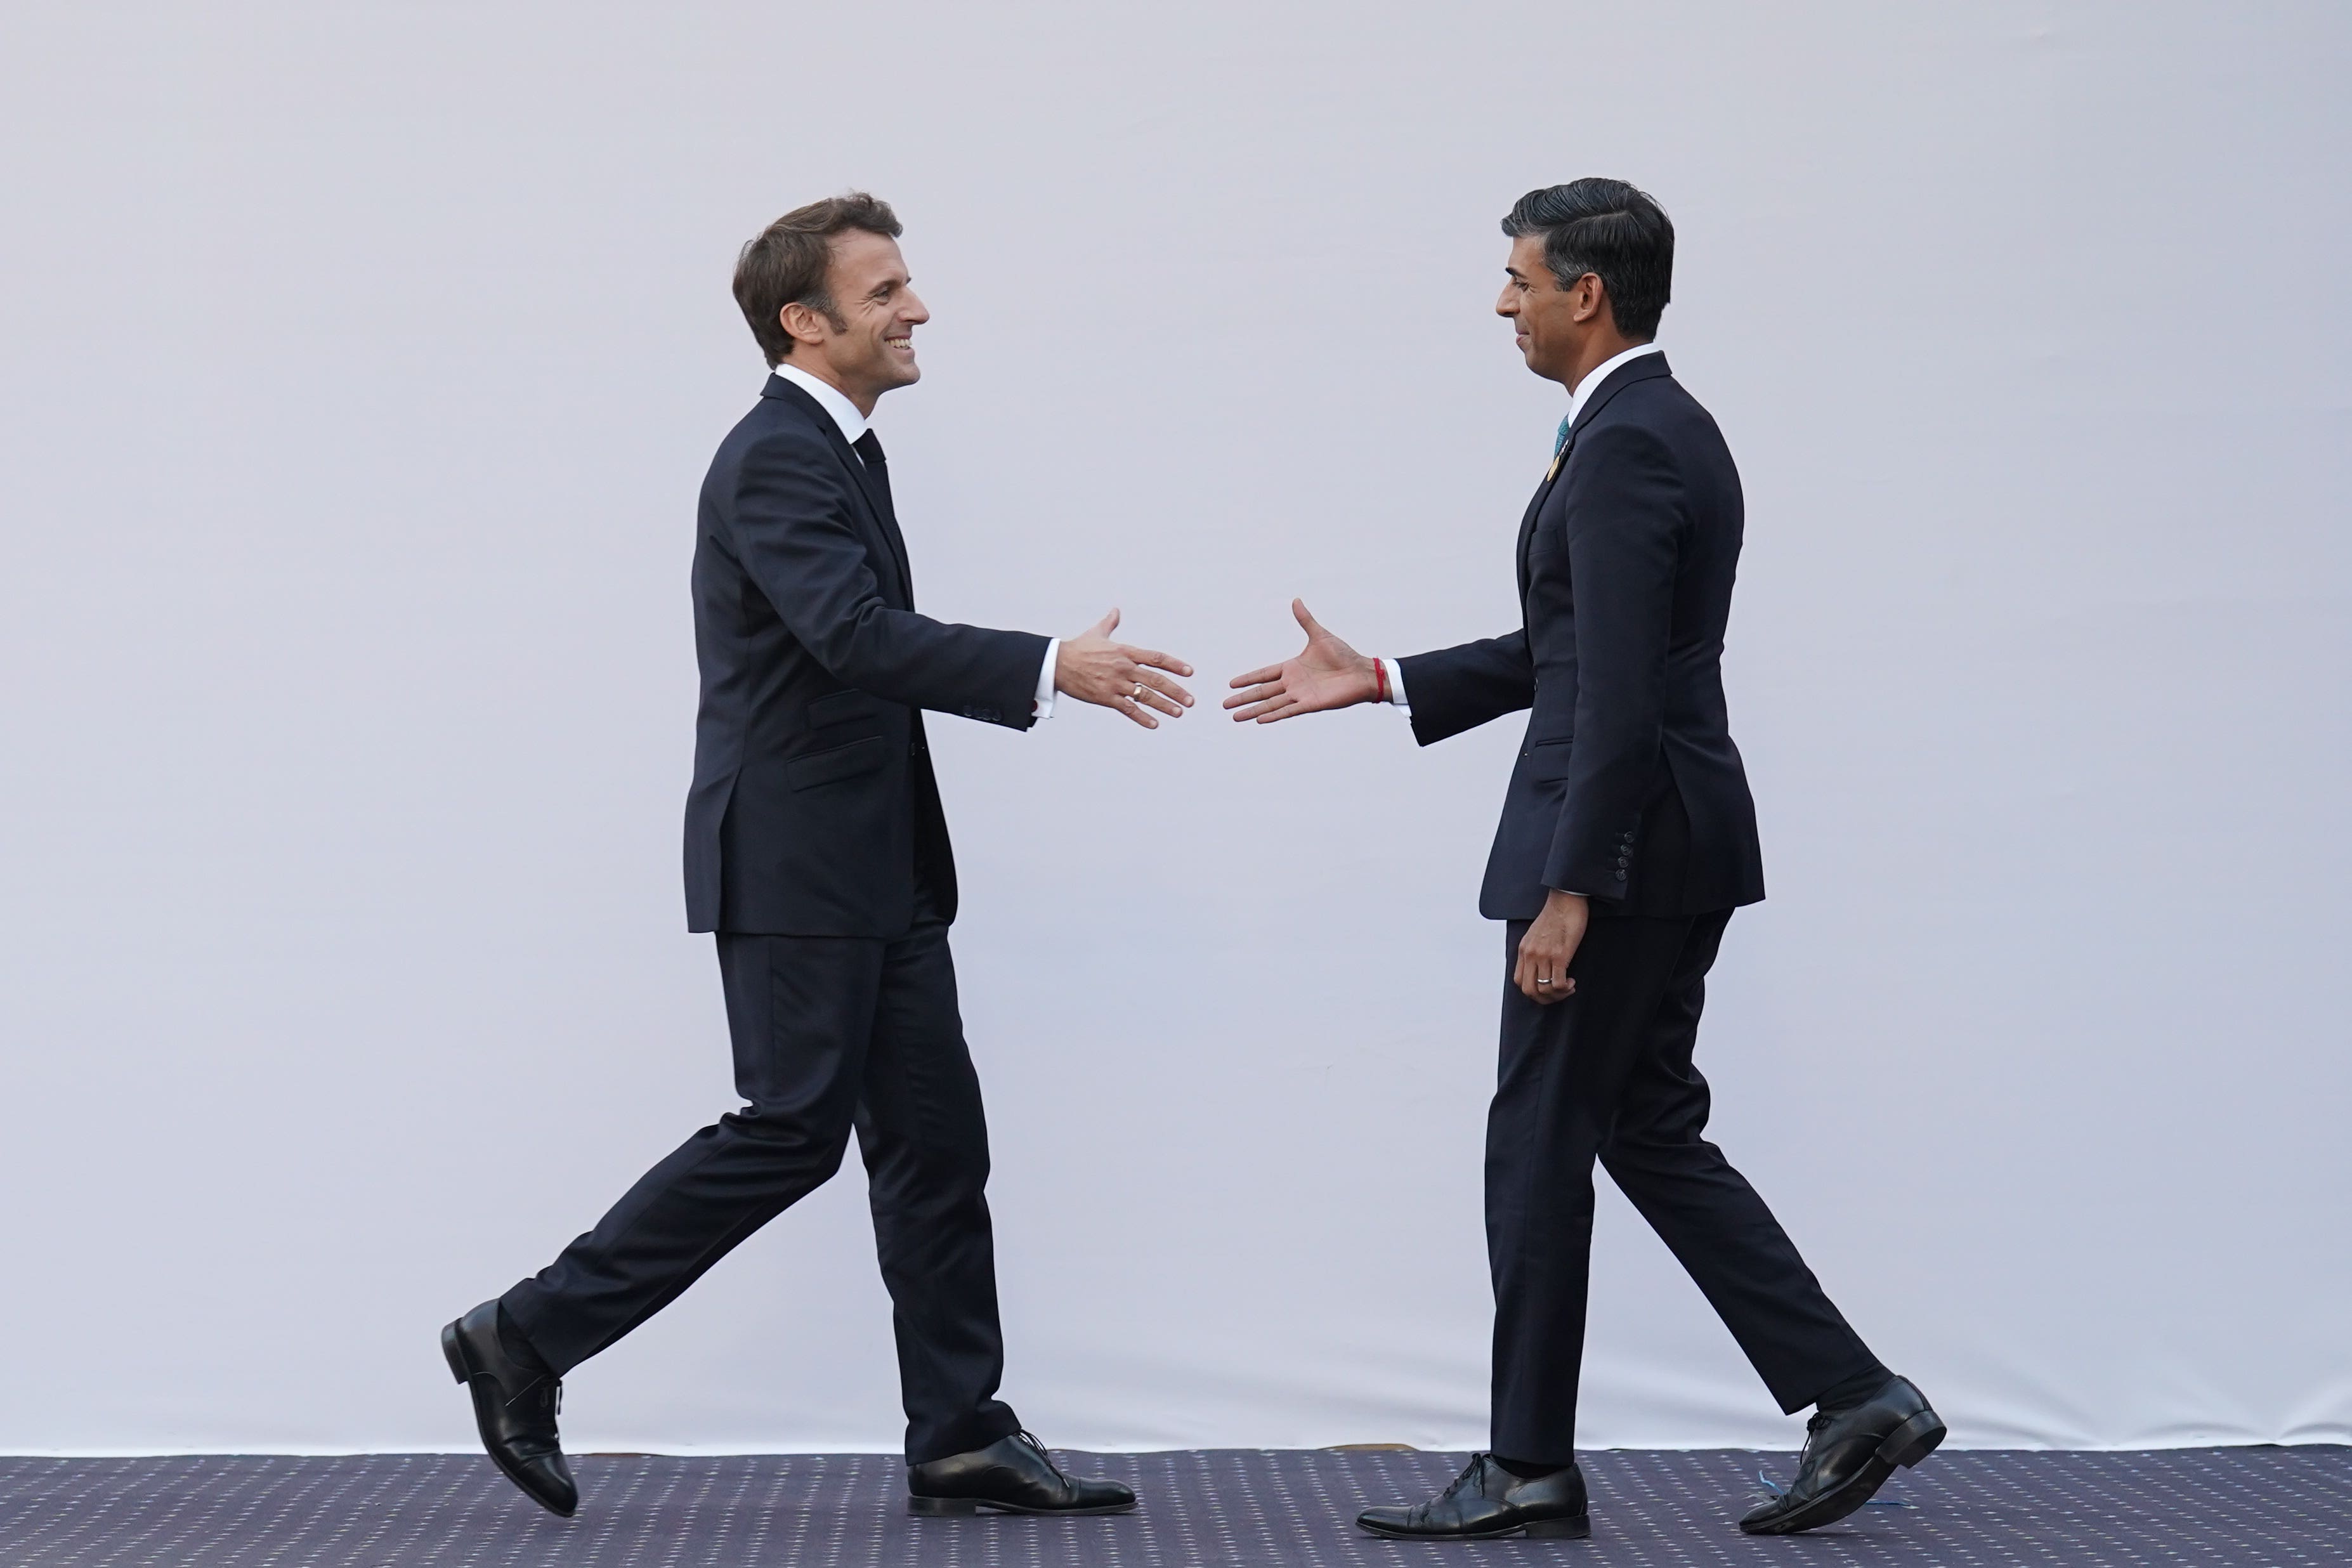 Sunak has considerably more in common – in career history, manner and character – with Macron than his immediate predecessors